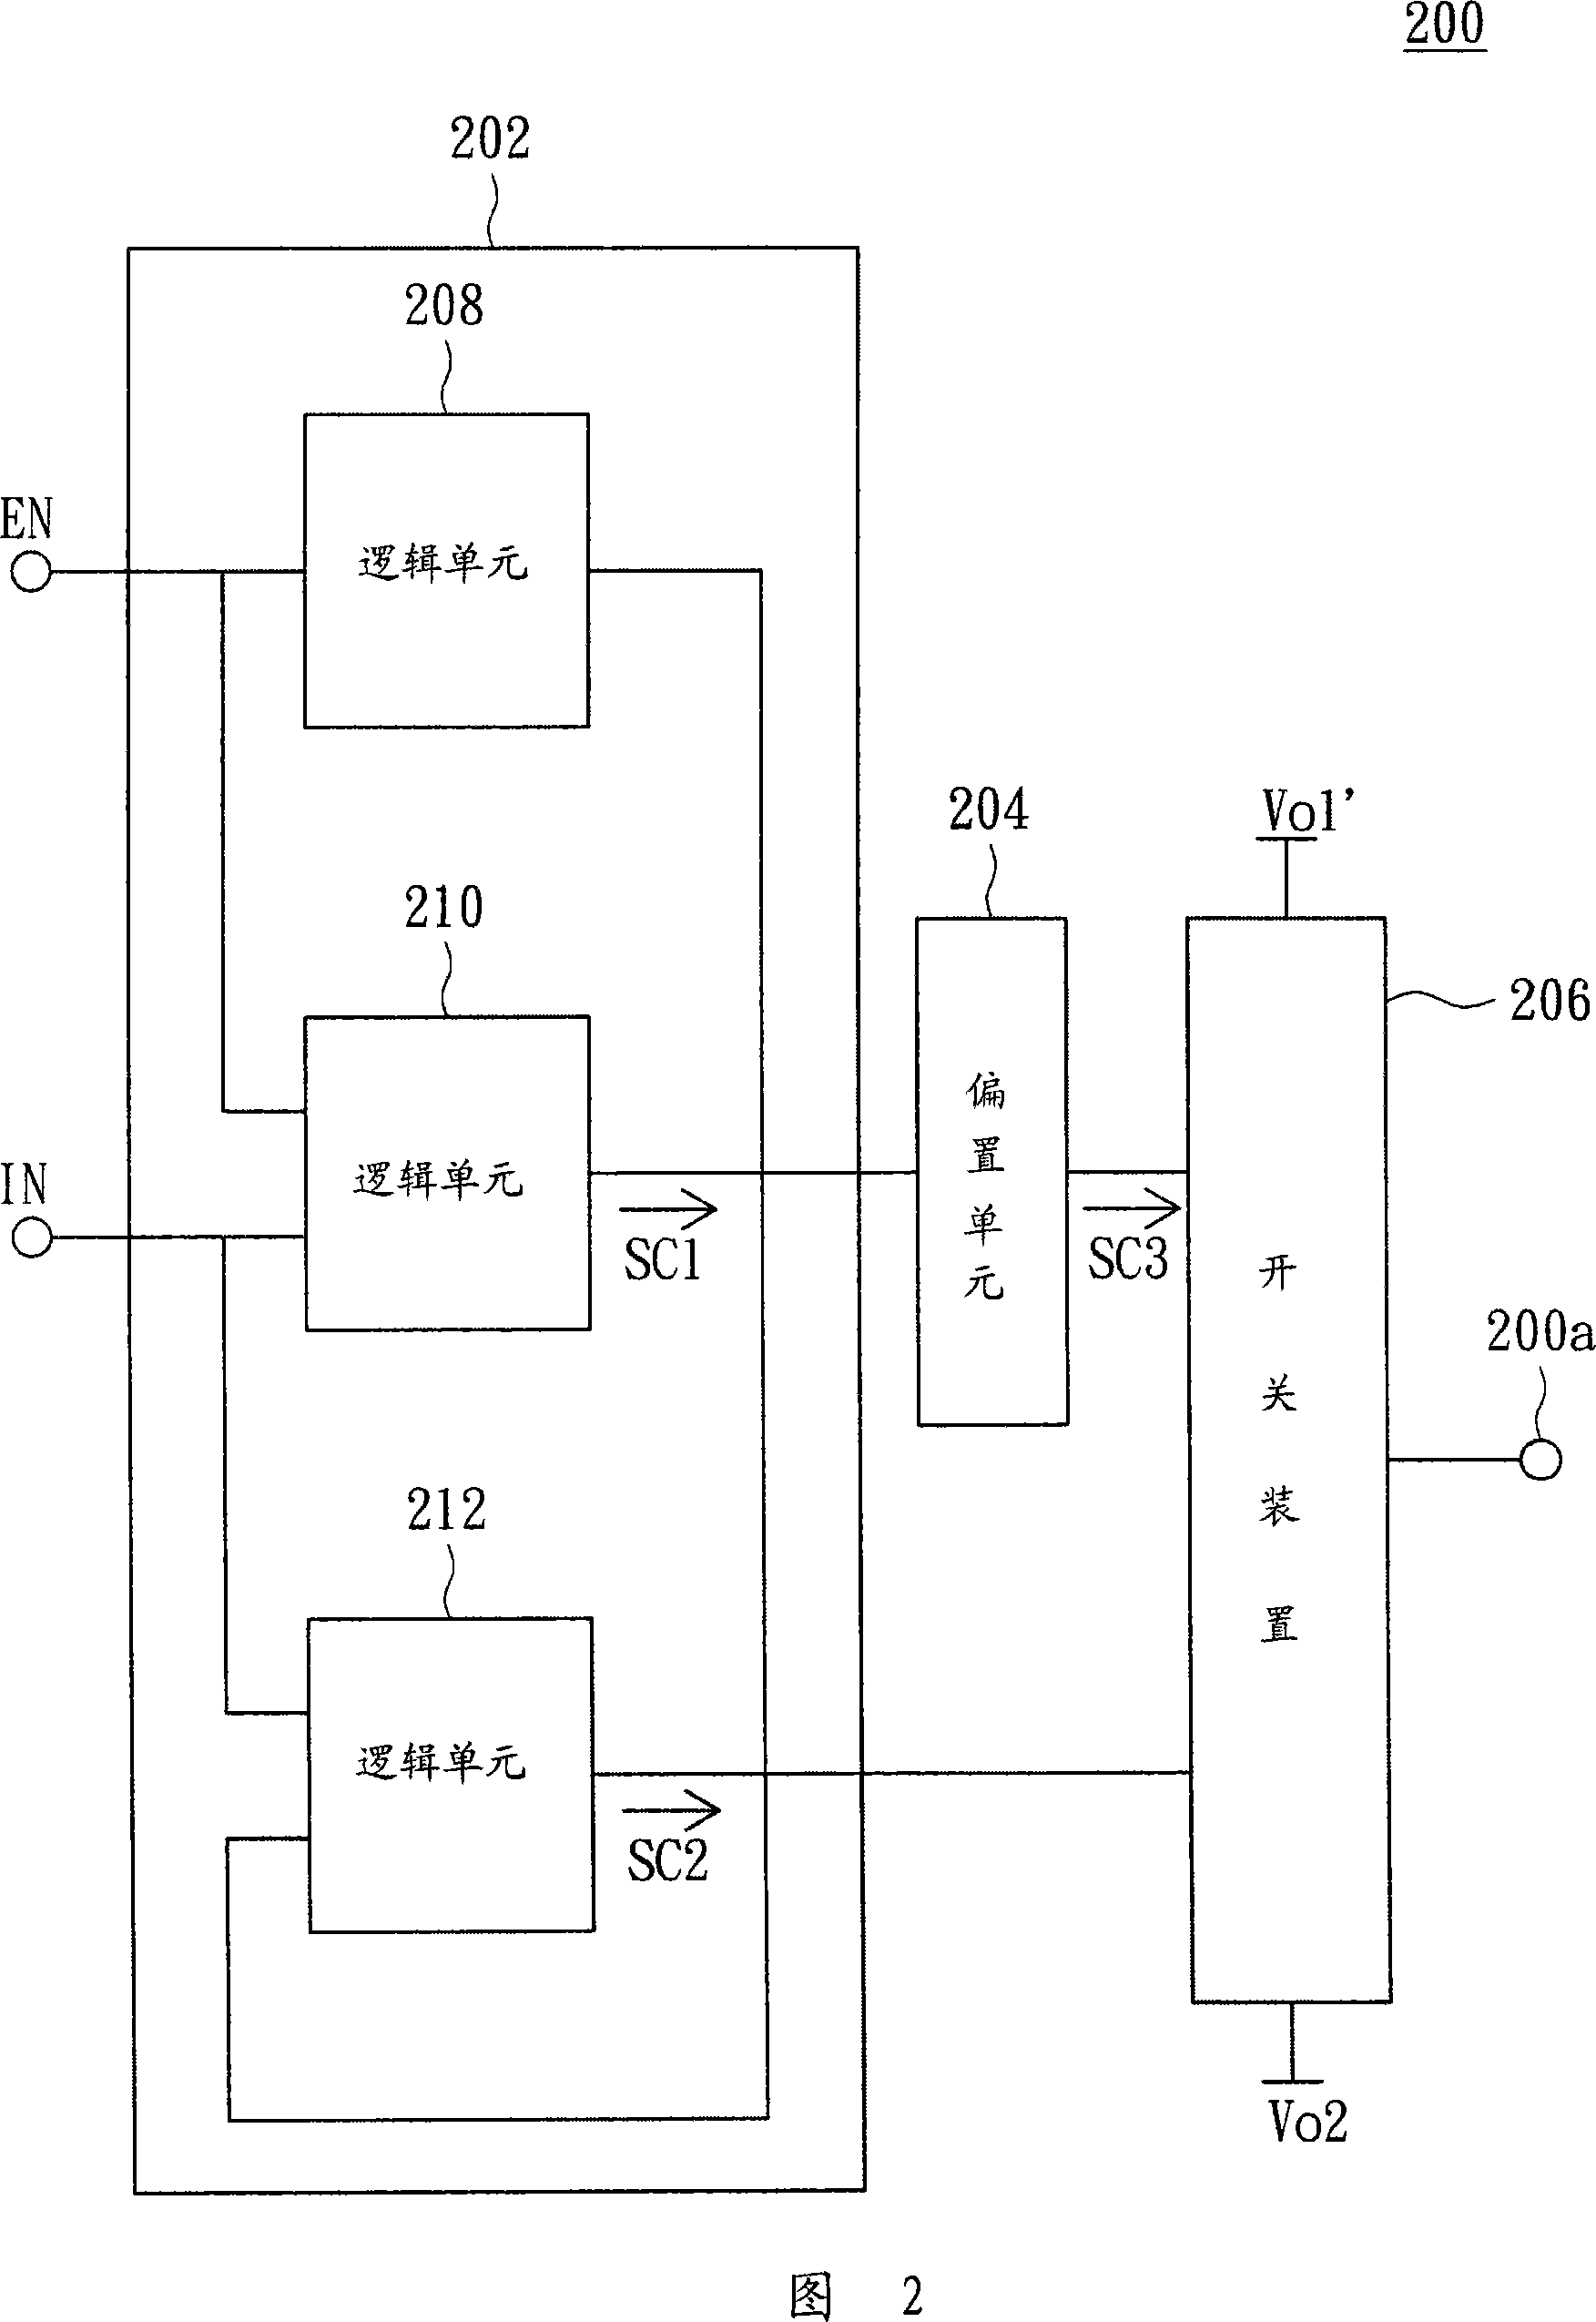 Low voltage complementary metal oxide semiconductor process tri-state buffer